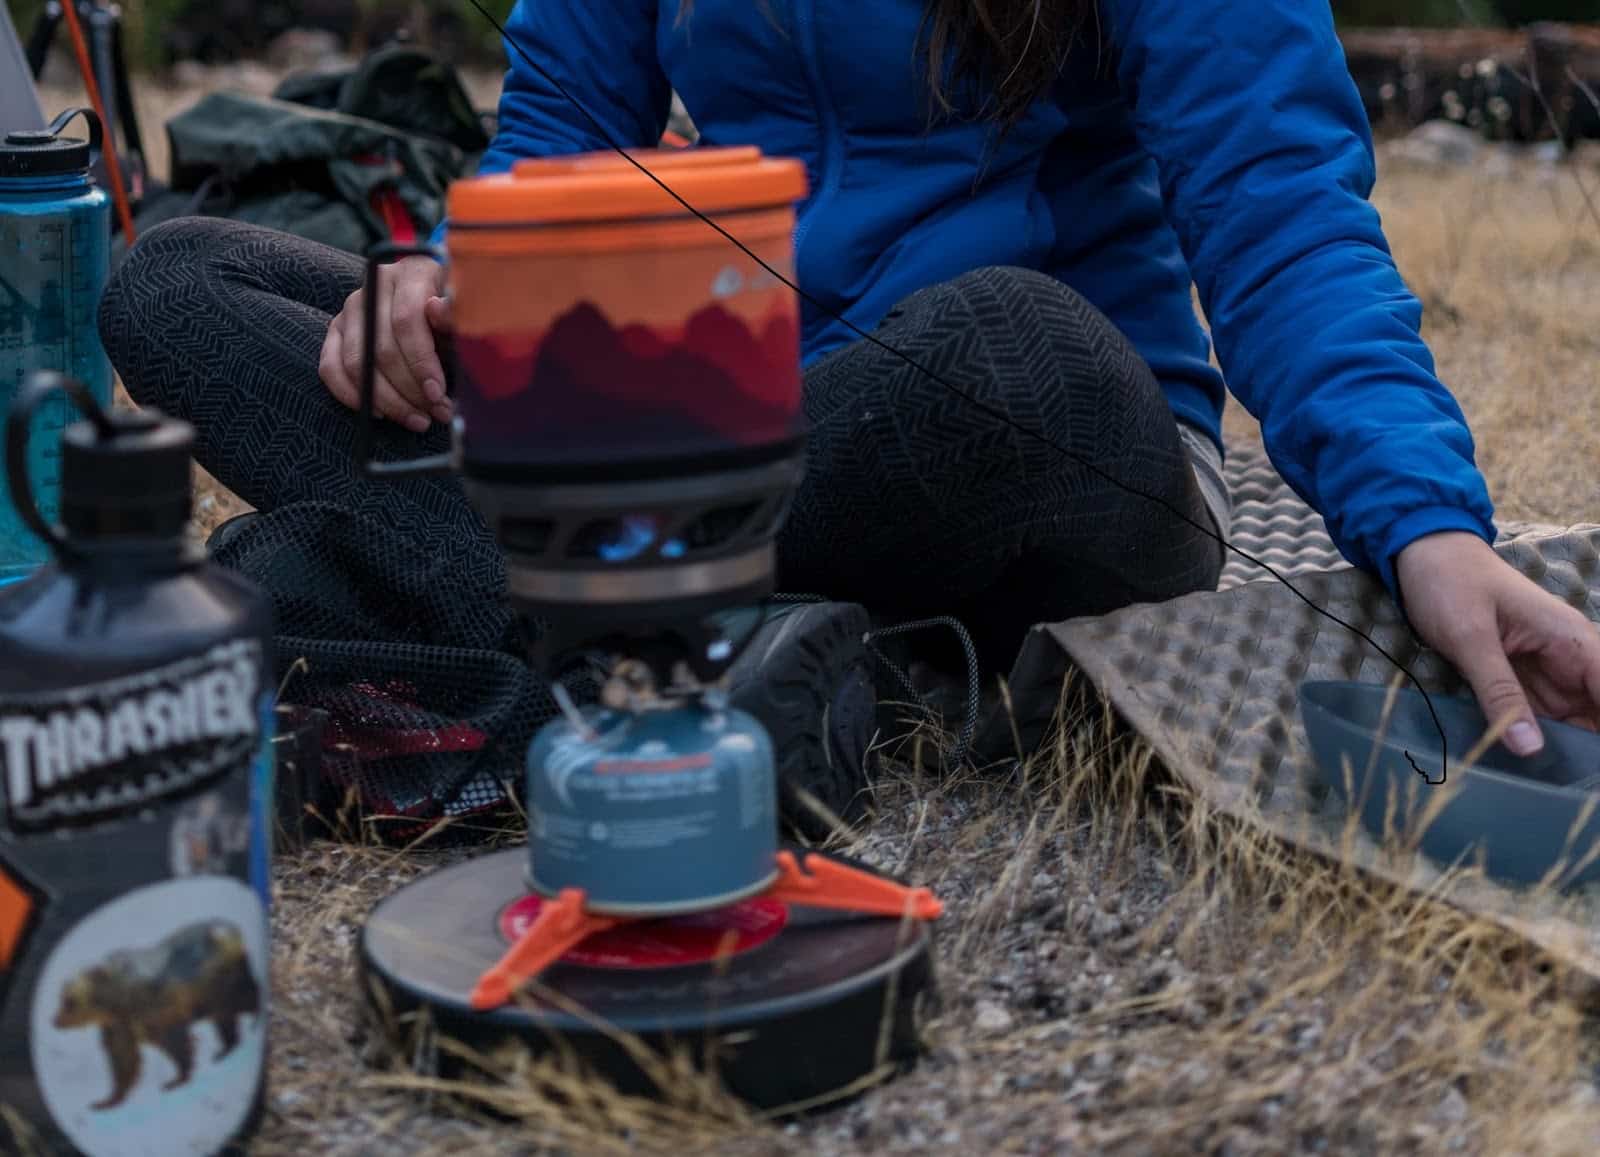 Person sitting on the ground with a Jetboil stove.